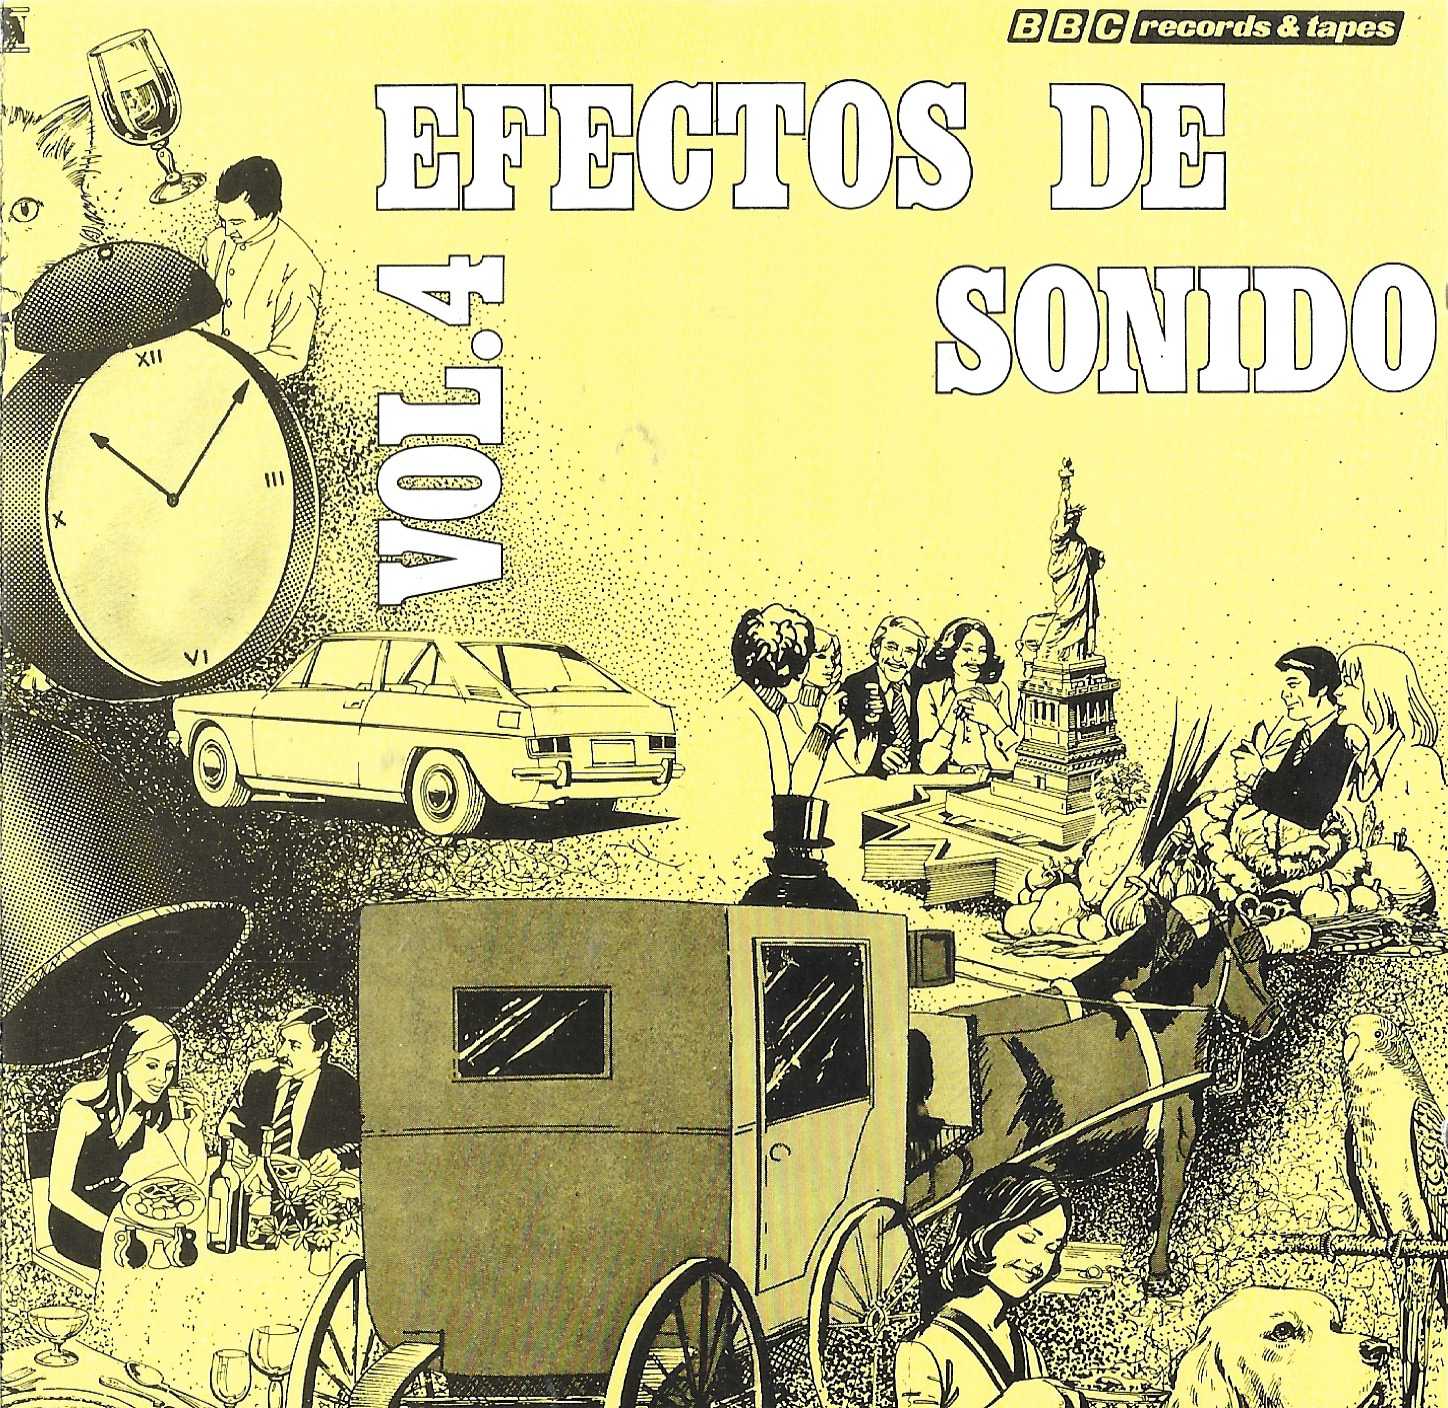 Picture of 95 0041 Effectos de sonido - Volume 4 by artist Various from the BBC cds - Records and Tapes library